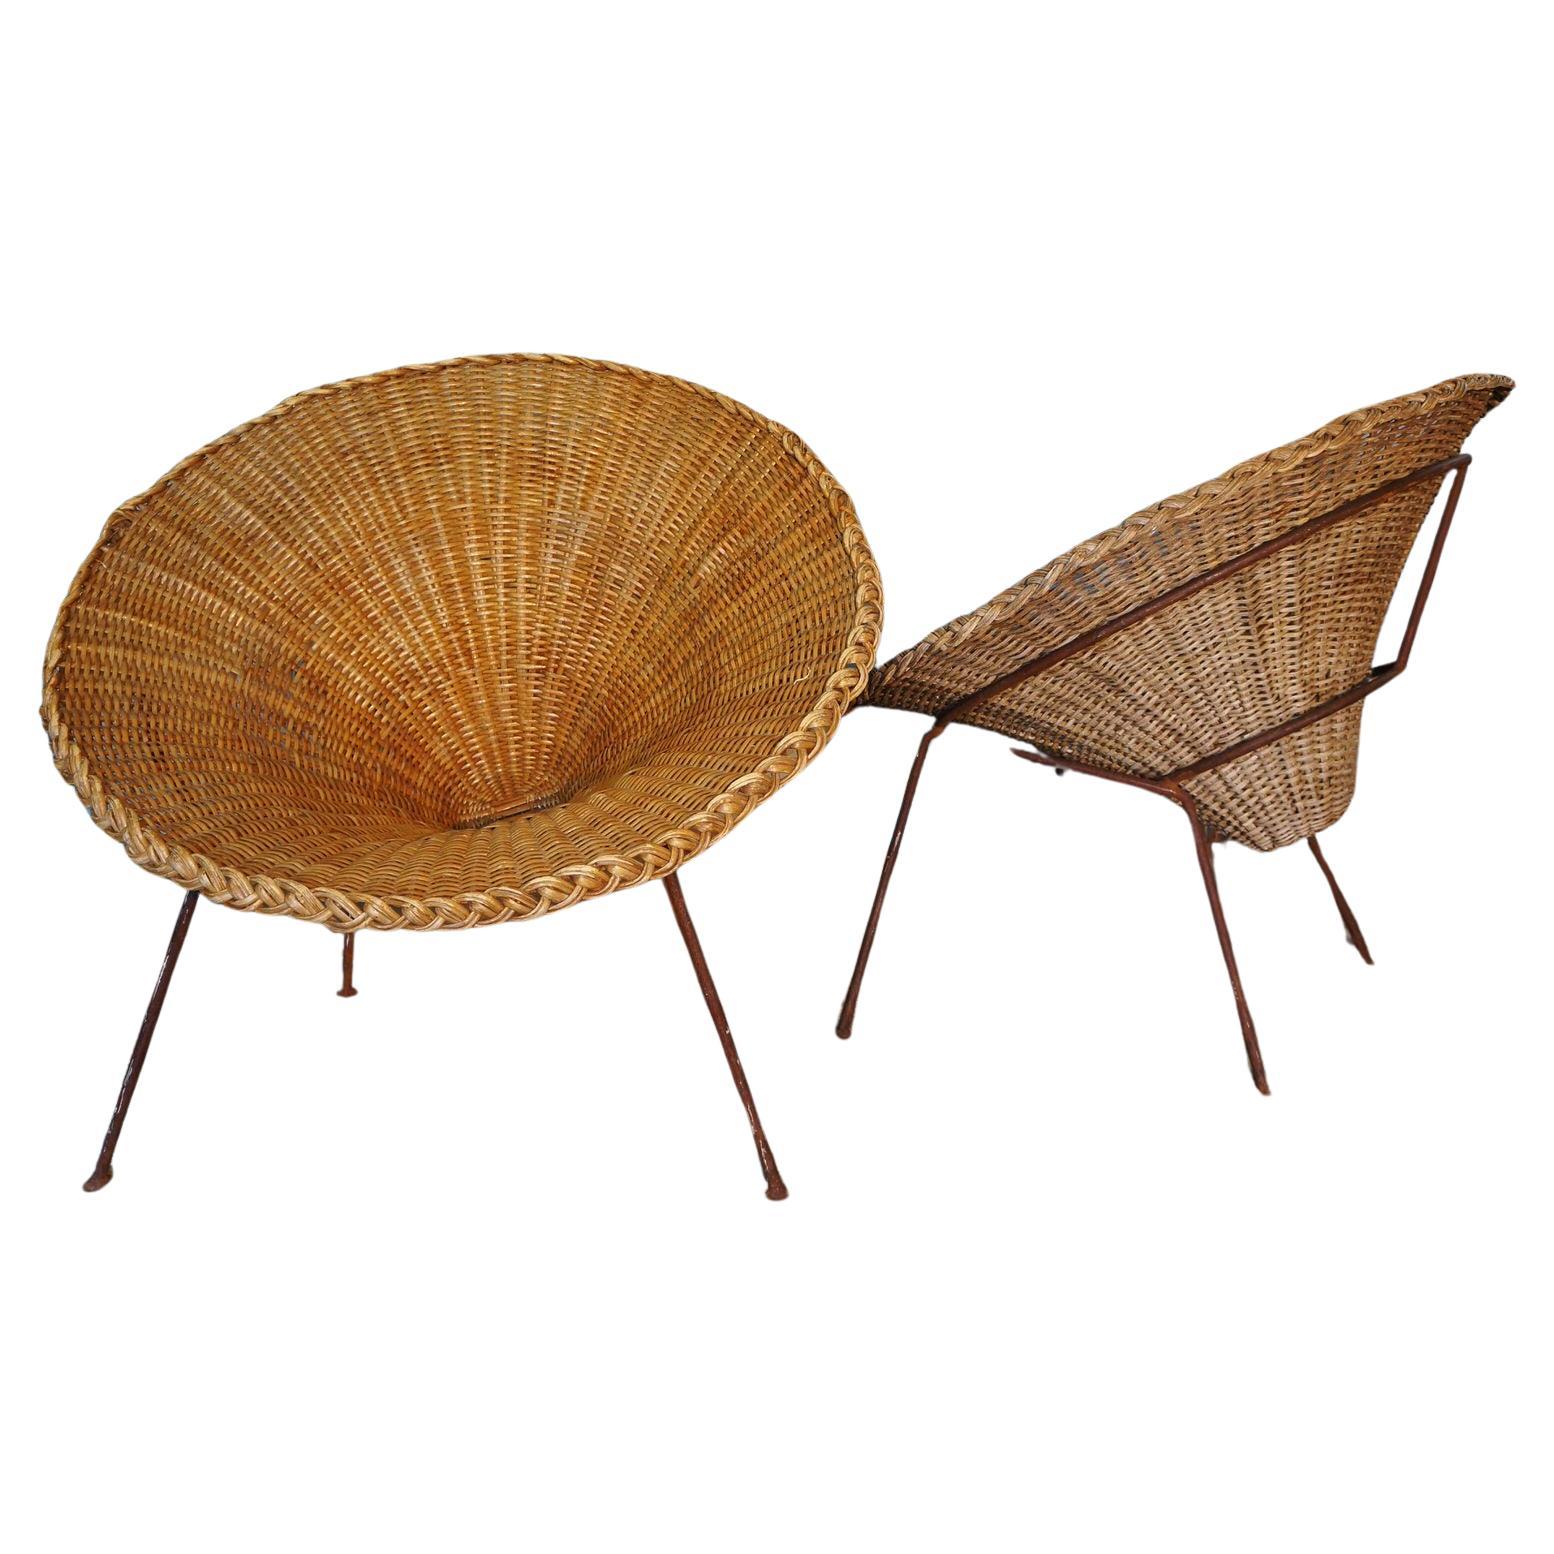 Pair of Sunflower Wicker Chairs, France, 1960´s, Mid Century